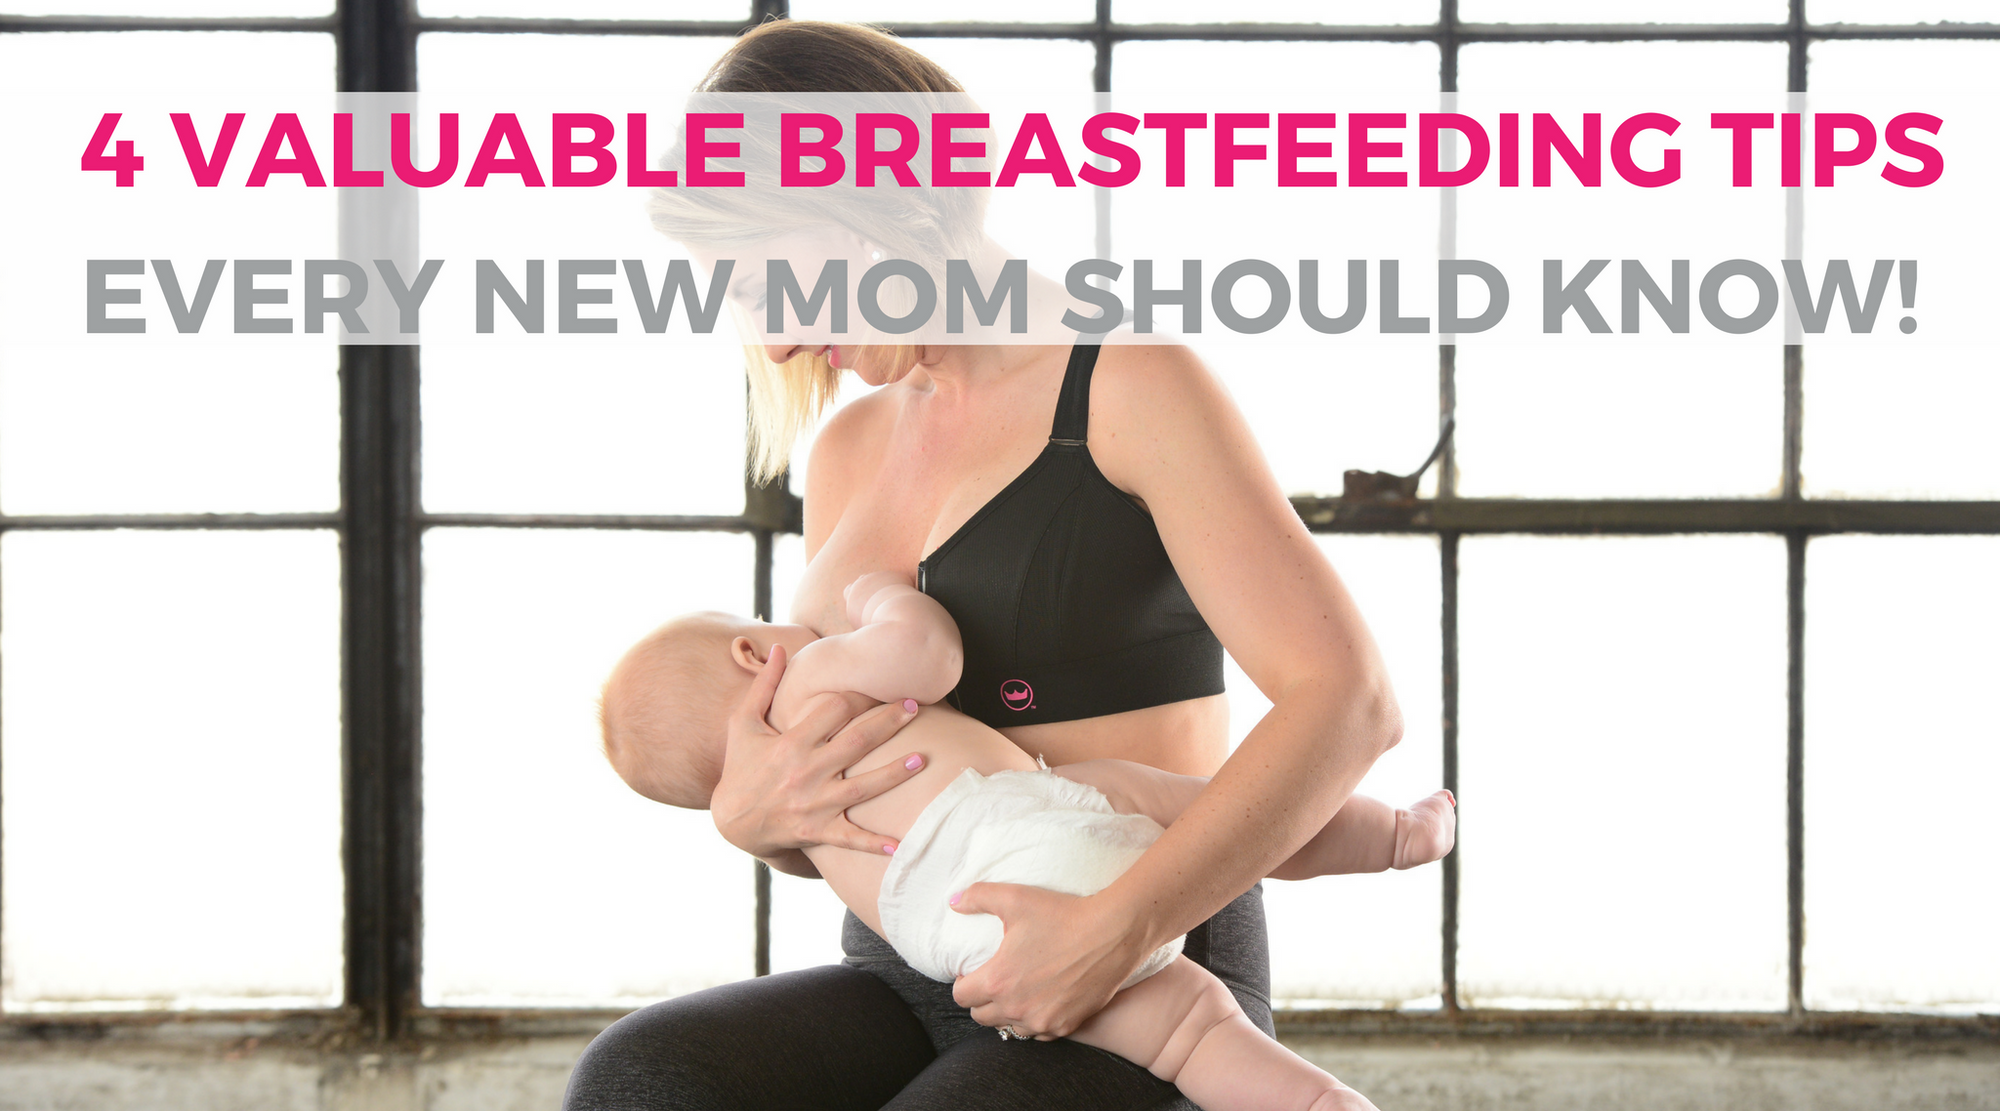 Breastfeeding Tips: What Moms Need to Know Before Your Newborn Arrives | Nursing your newborn baby isn’t an easy task. We’ve rounded up the best & most important tips every new mom should know before starting to breastfeed.  